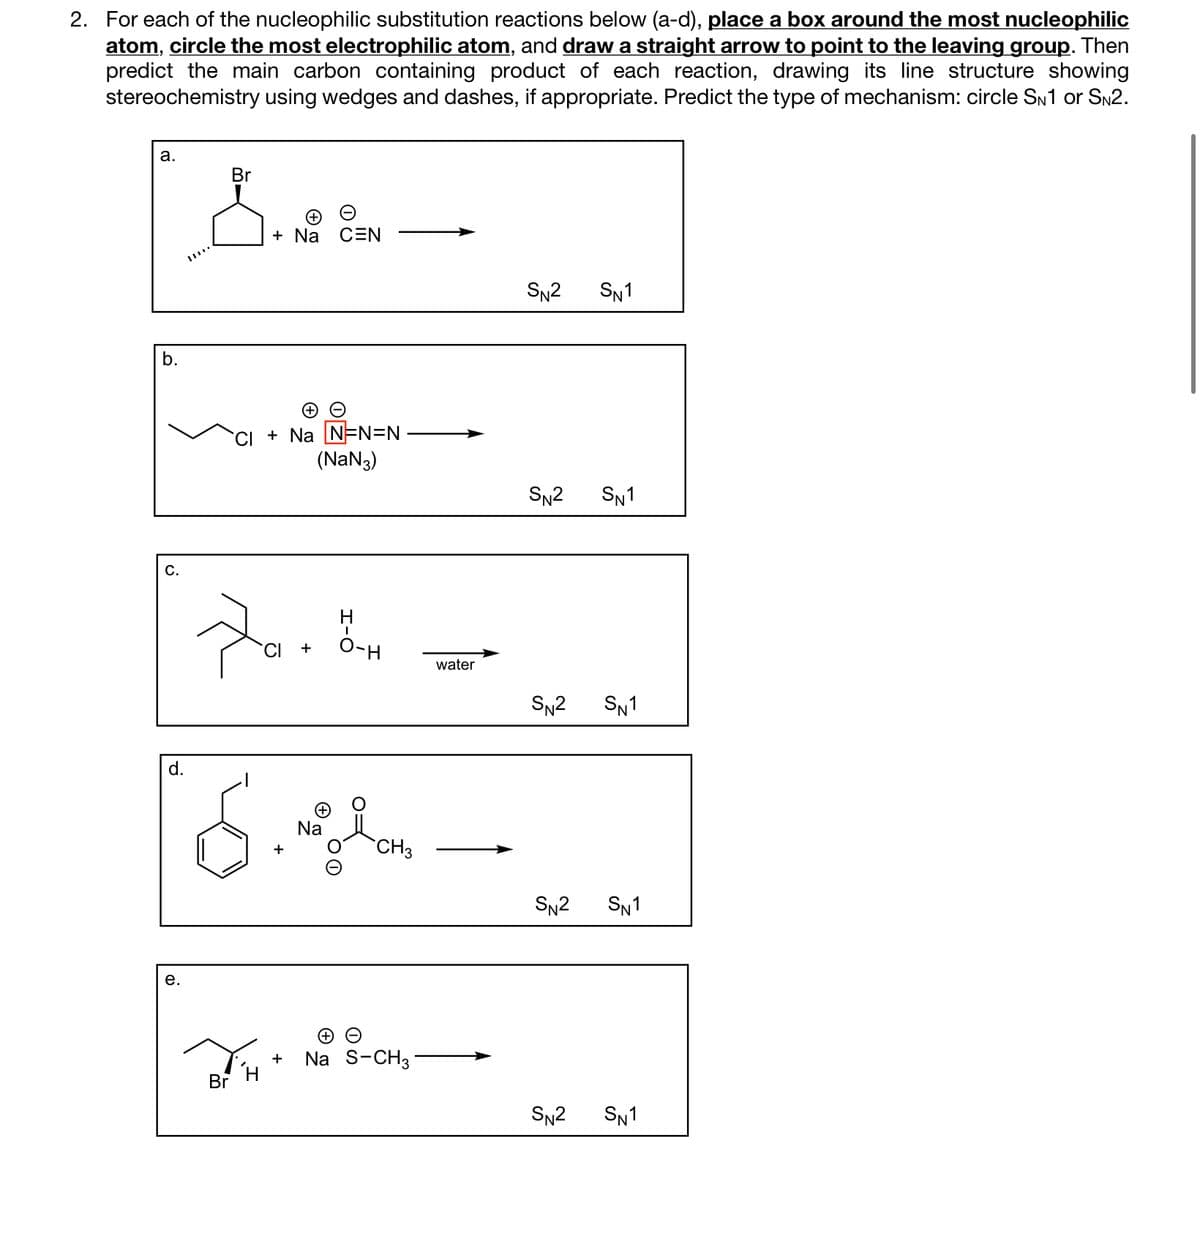 2. For each of the nucleophilic substitution reactions below (a-d), place a box around the most nucleophilic
atom, circle the most electrophilic atom, and draw a straight arrow to point to the leaving group. Then
predict the main carbon containing product of each reaction, drawing its line structure showing
stereochemistry using wedges and dashes, if appropriate. Predict the type of mechanism: circle SN1 or SN2.
a.
b.
C.
d.
e.
Br
+ Na CEN
Br
→→
CI + Na N=N=N
(NaN3)
Za
H
CI + O-H
Sigla
Na
CH3
(+
+ Na S-CH3
water
SN2 SN1
SN2 SN1
SN2 SN1
SN2 SN1
SN² SN1